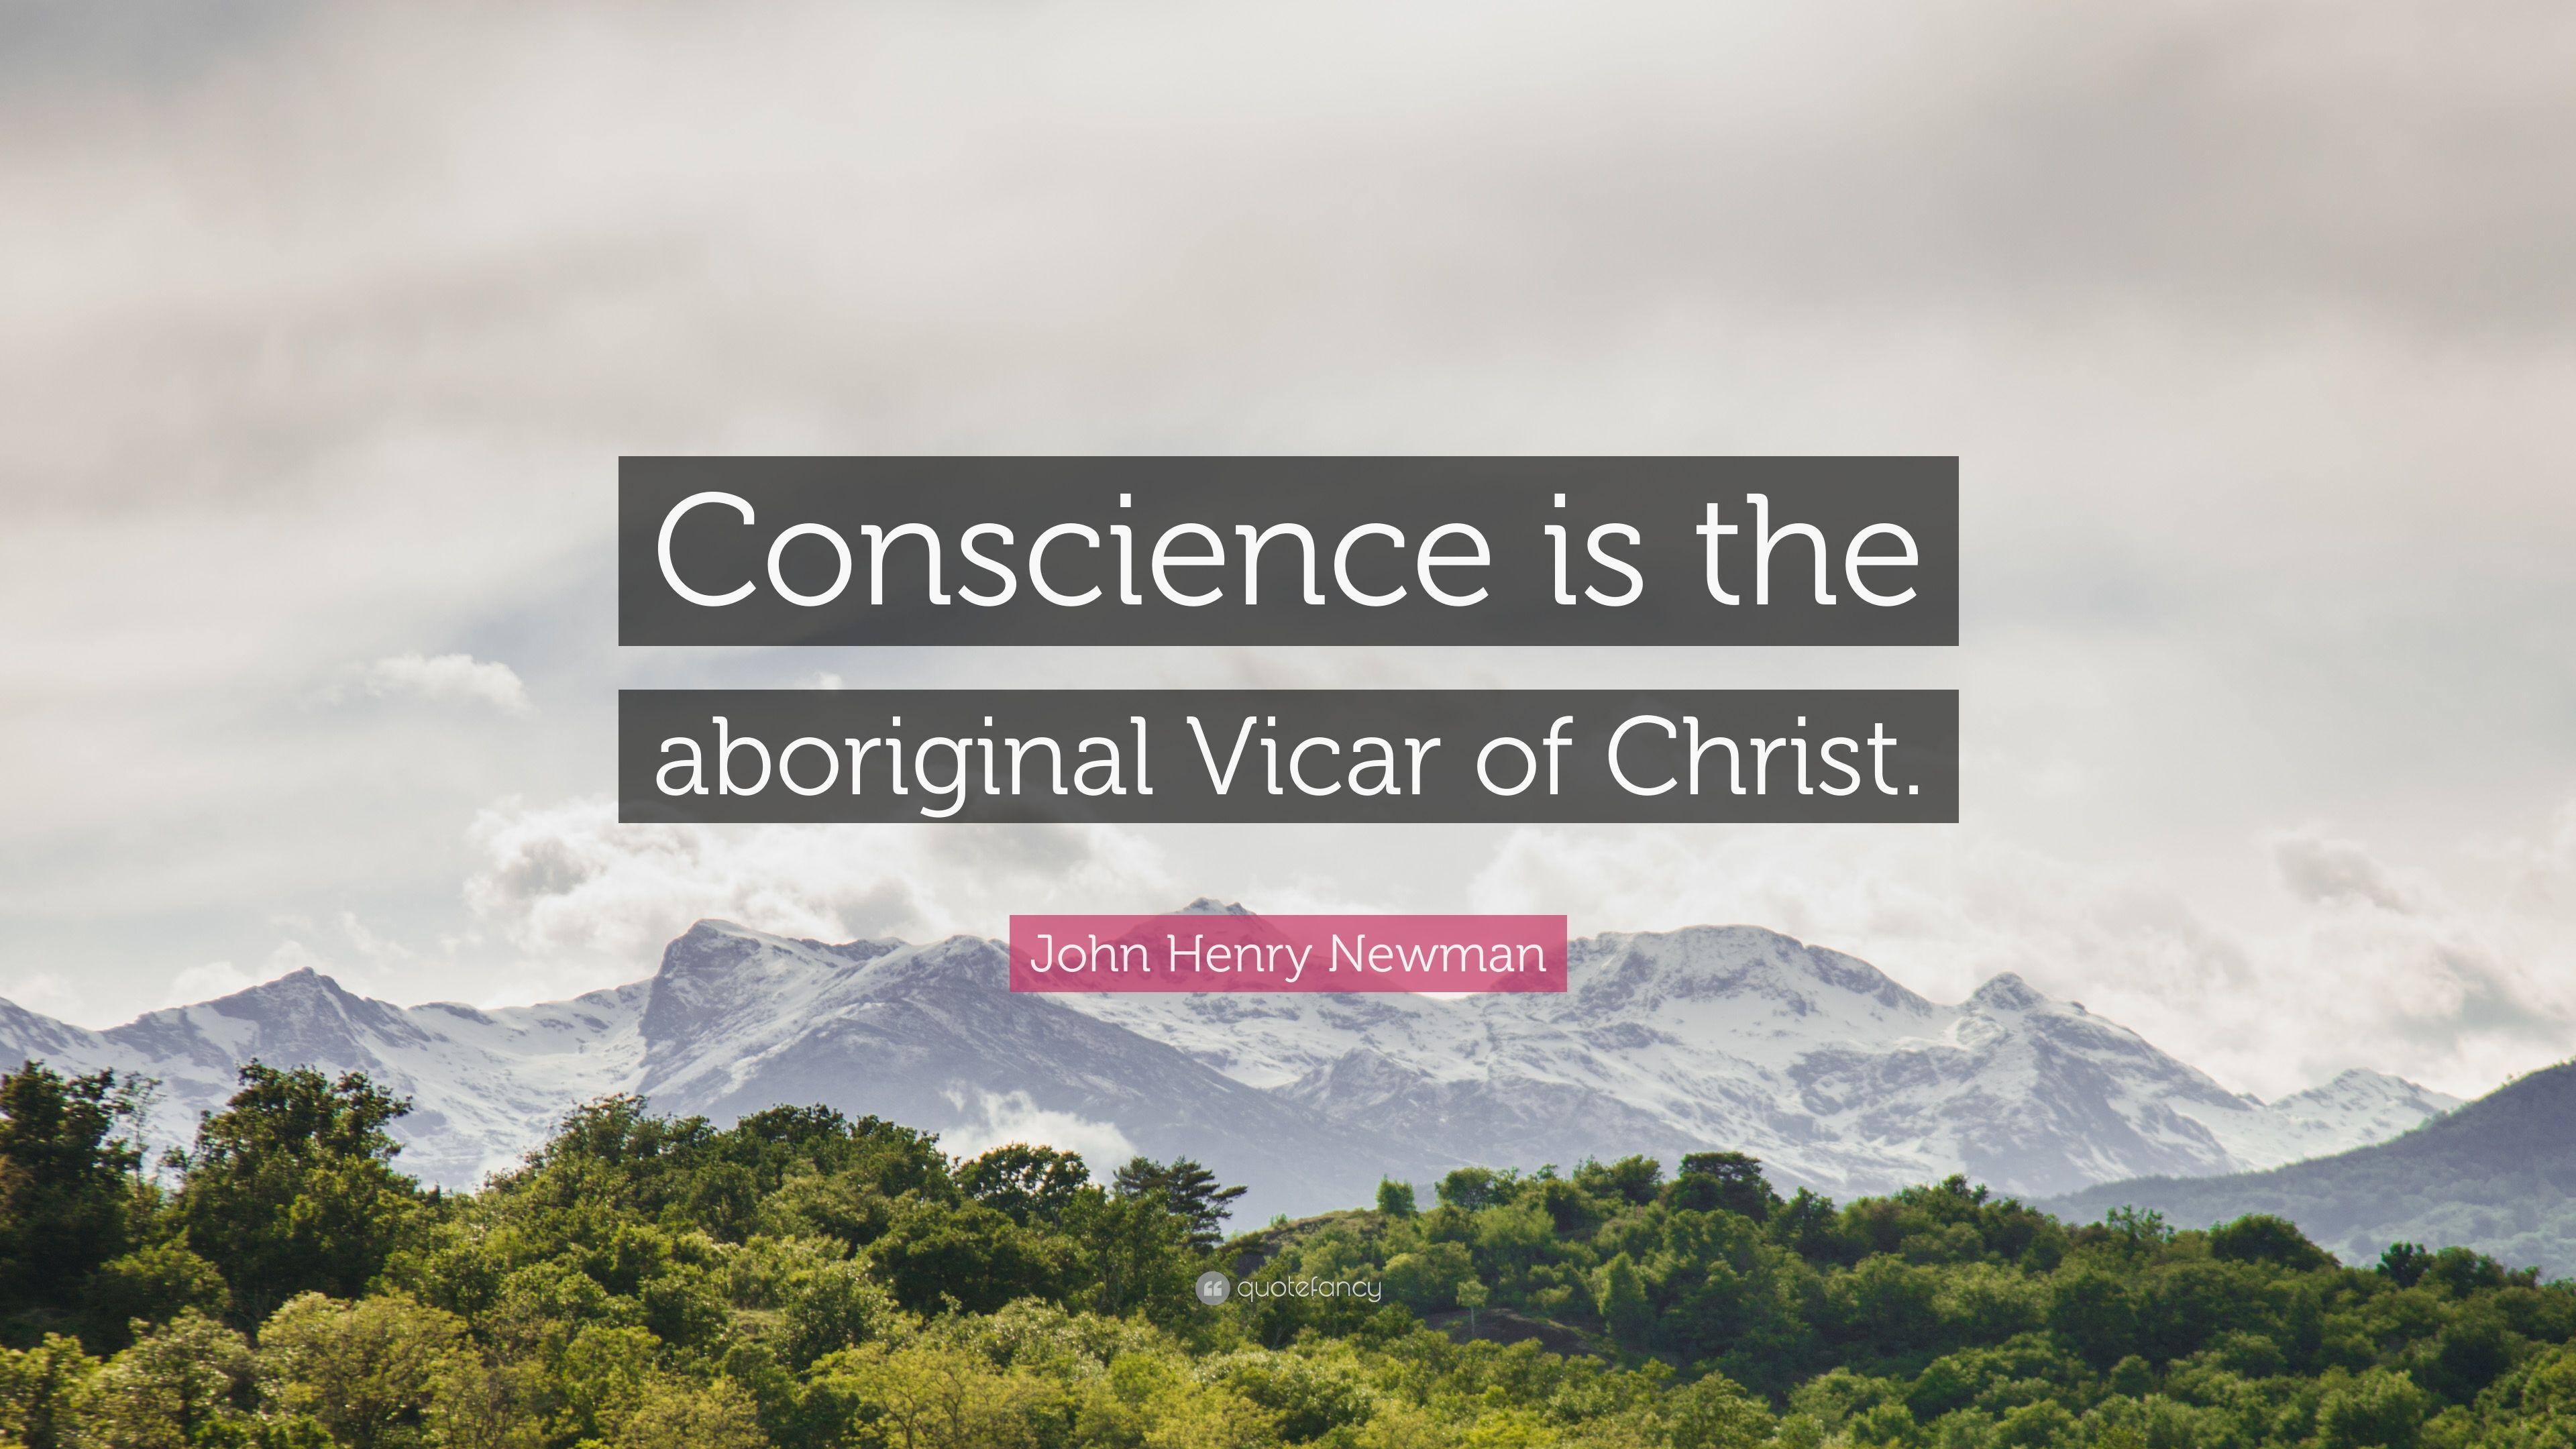 John Henry Newman Quote: “Conscience is the aboriginal Vicar